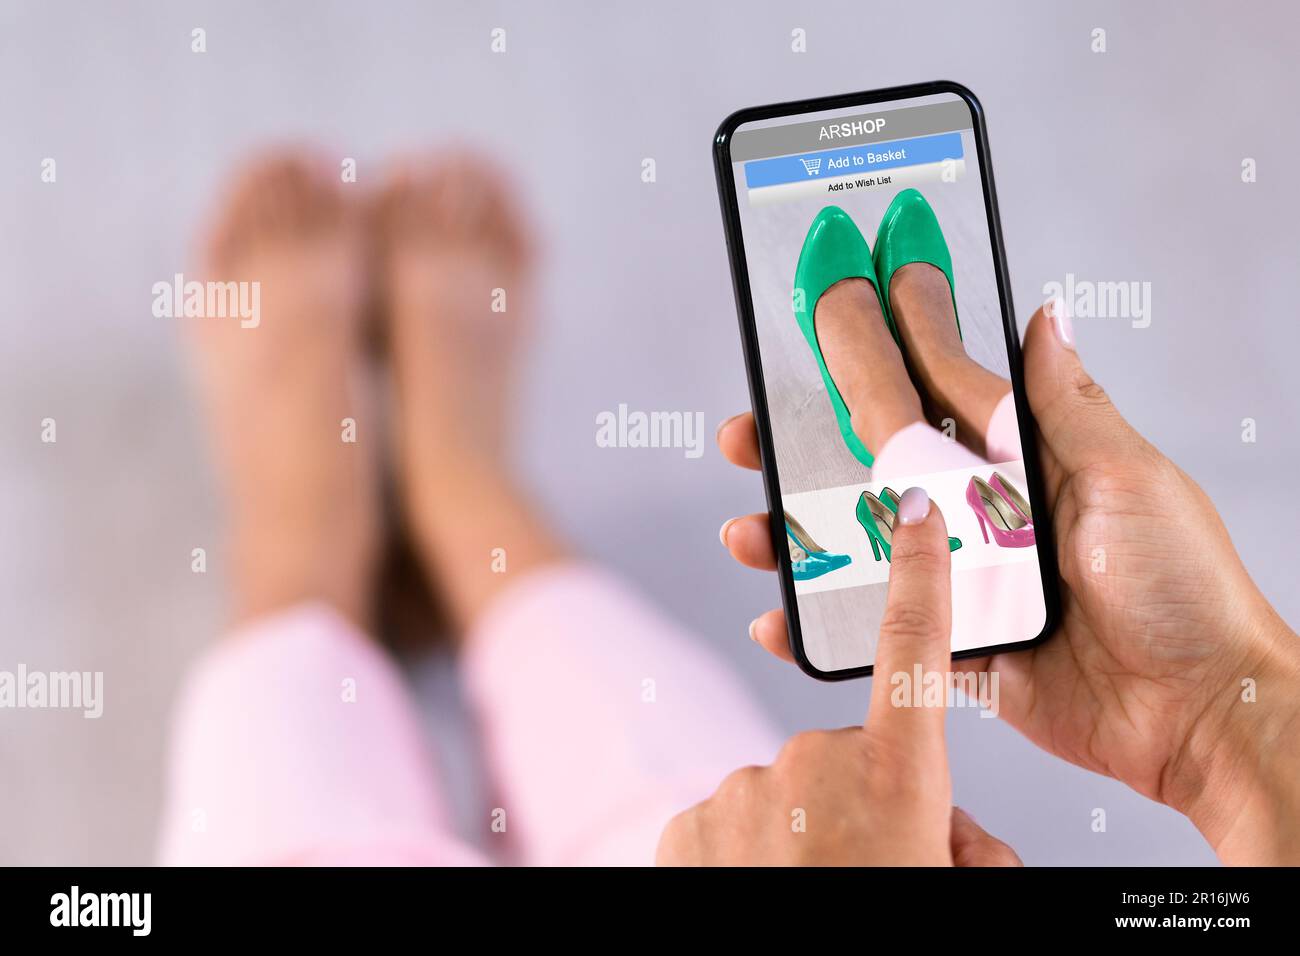 Woman Trying Virtual High Heel Shoes In Shop Or Store AR App Stock Photo